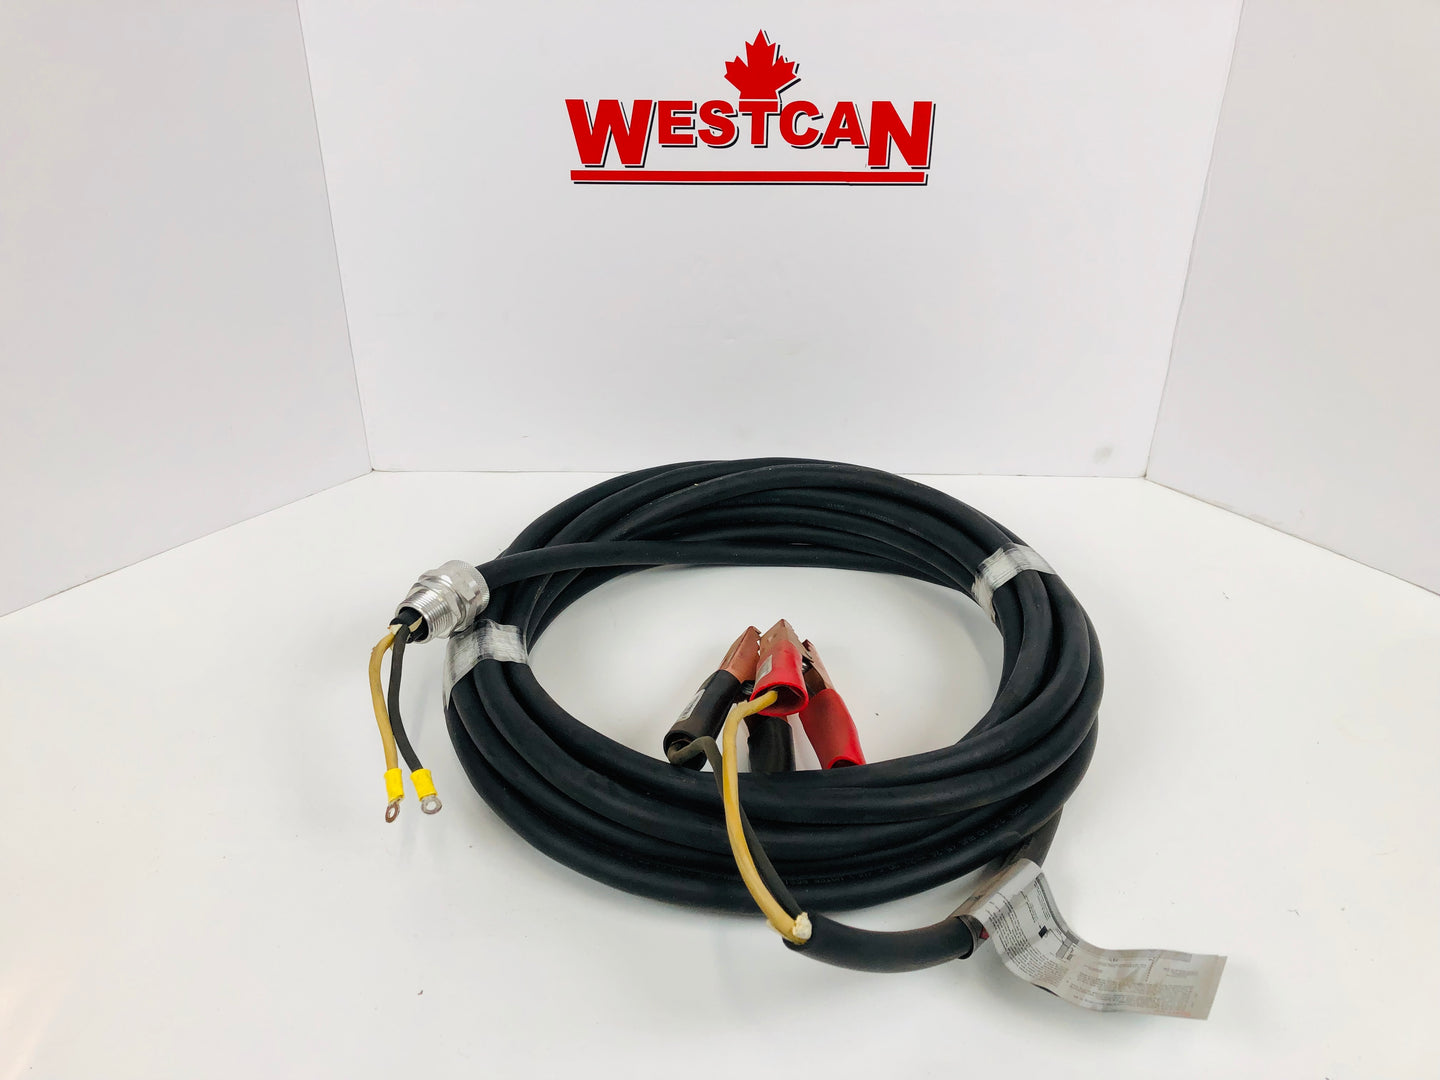 Set 12V Leads, 25',  For CCI Thermal Cata-dyne Catalytic Heater